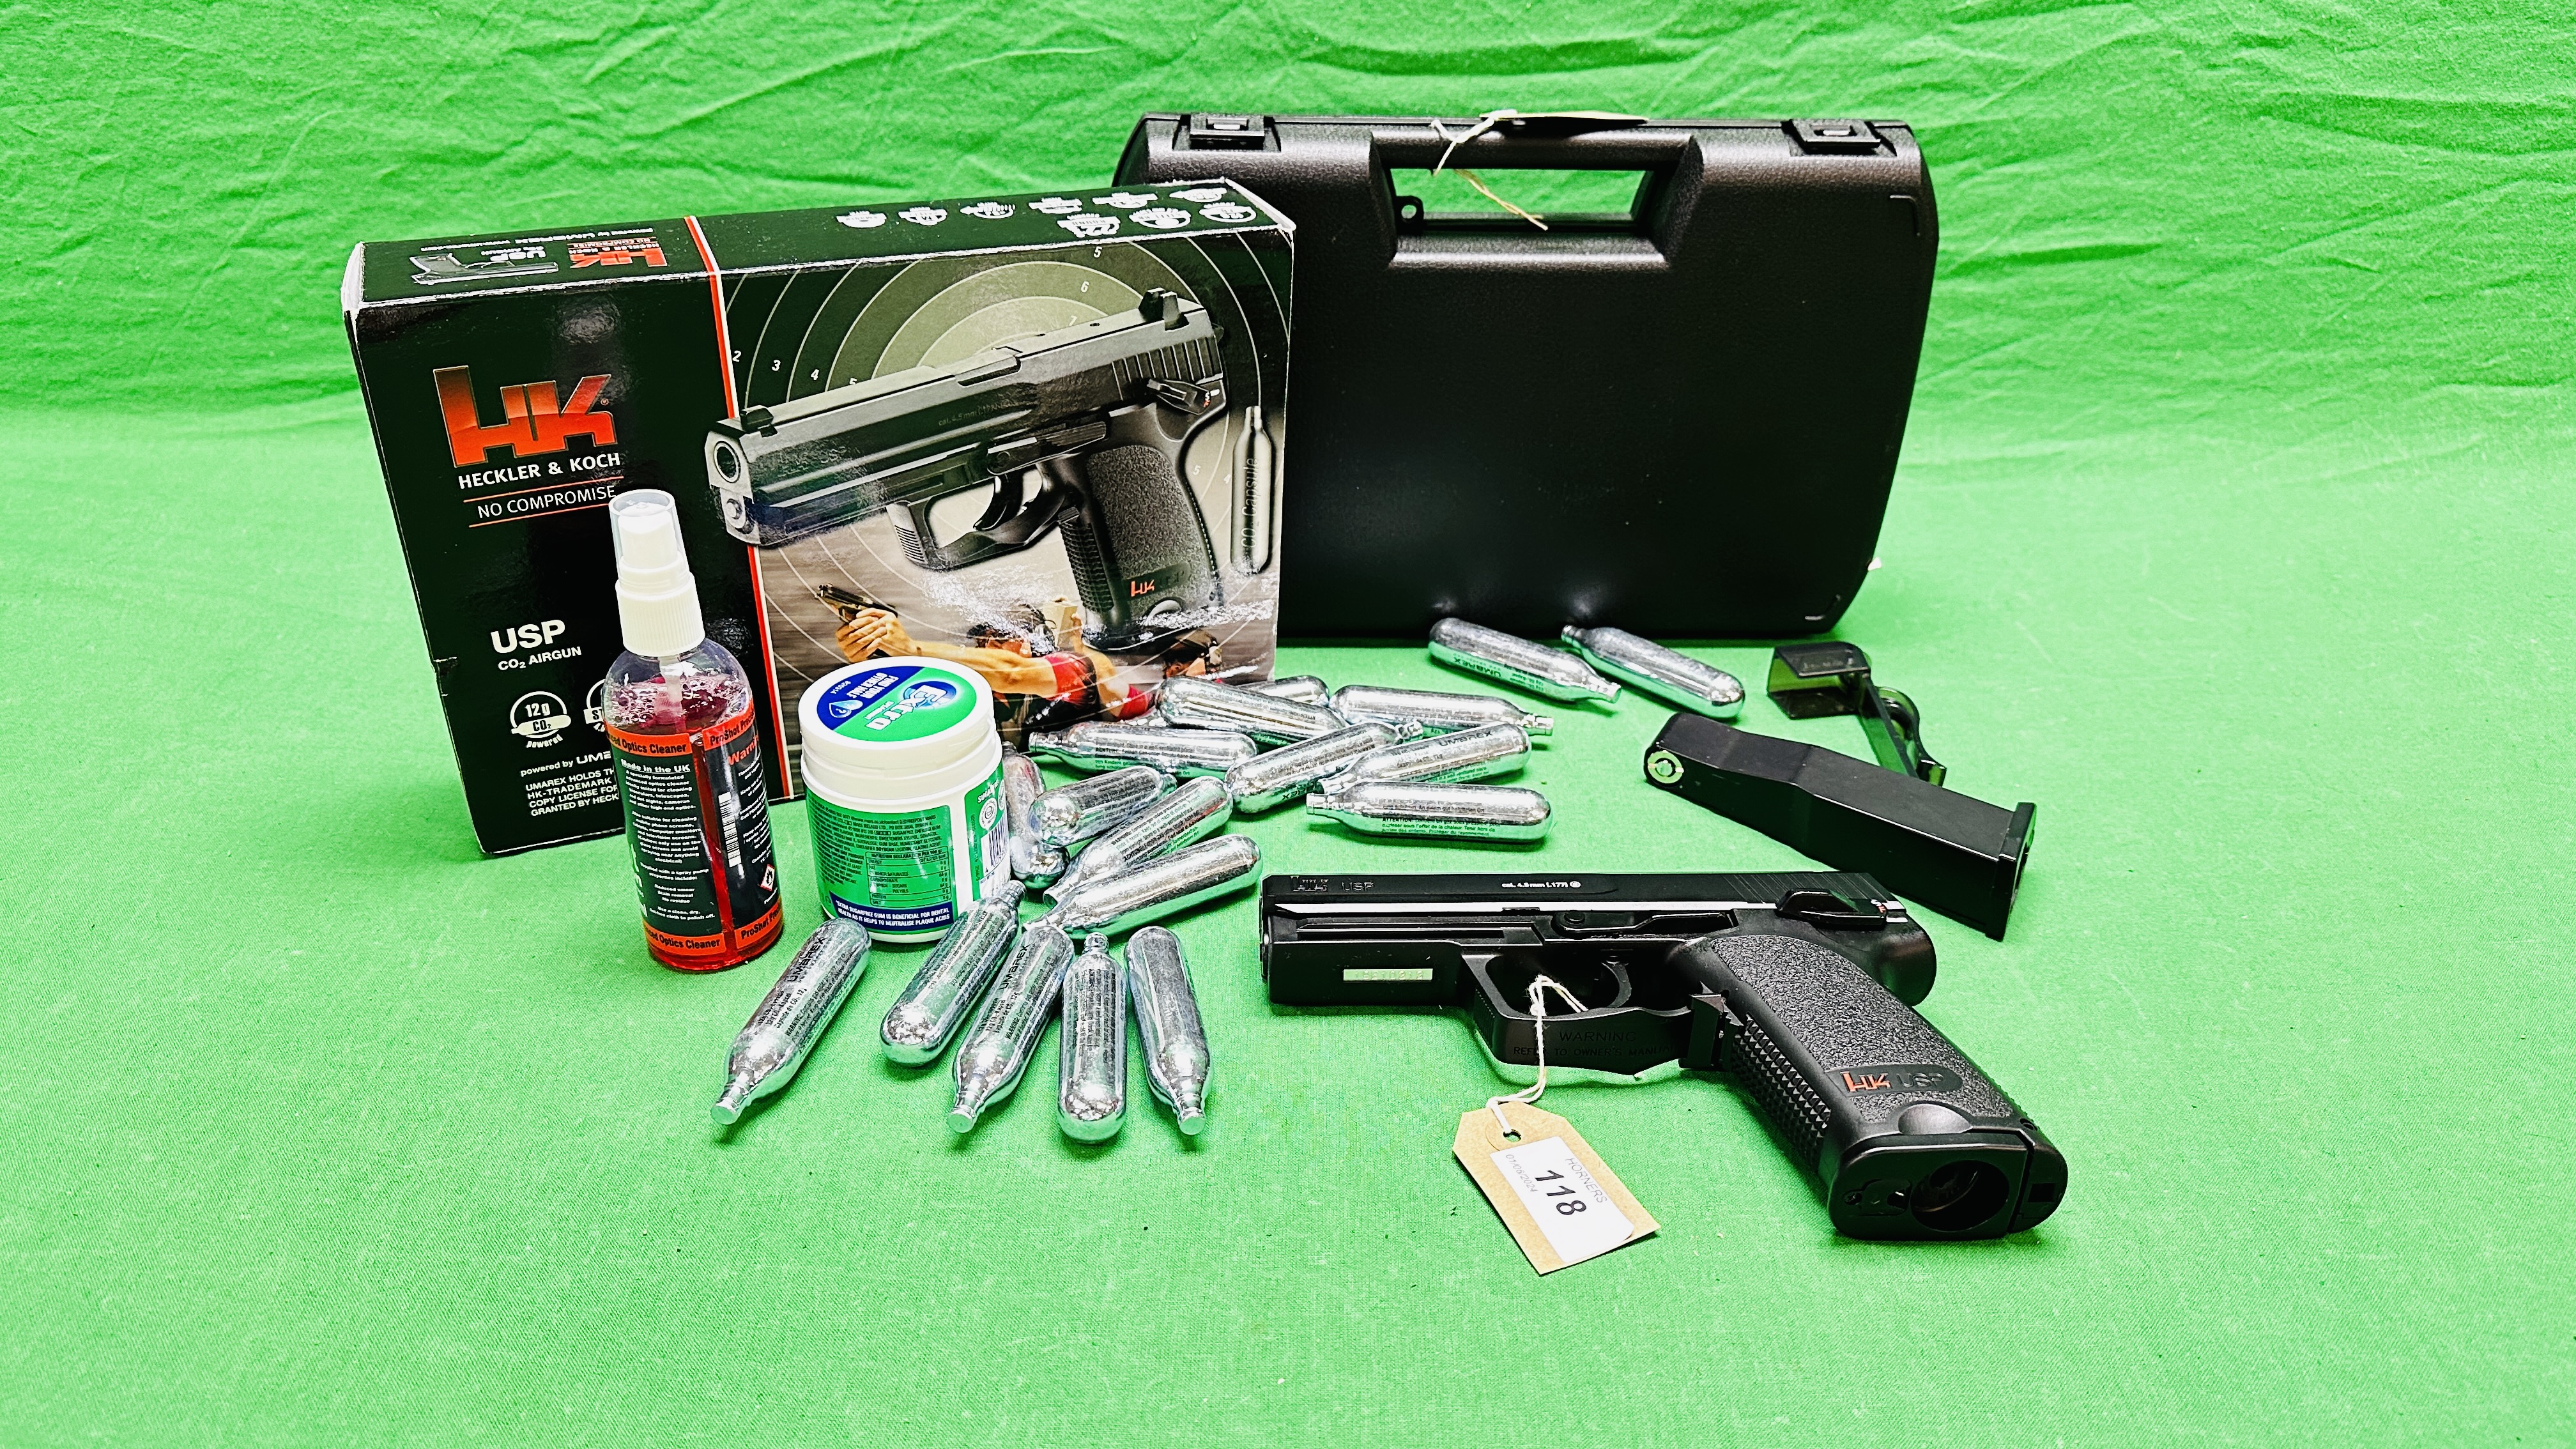 A BOXED HECKLER & KOCH USP 22 ROUND CO2 STELL BB AIR PISTOL COMPLETE WITH HARD TRANSIT CASE,